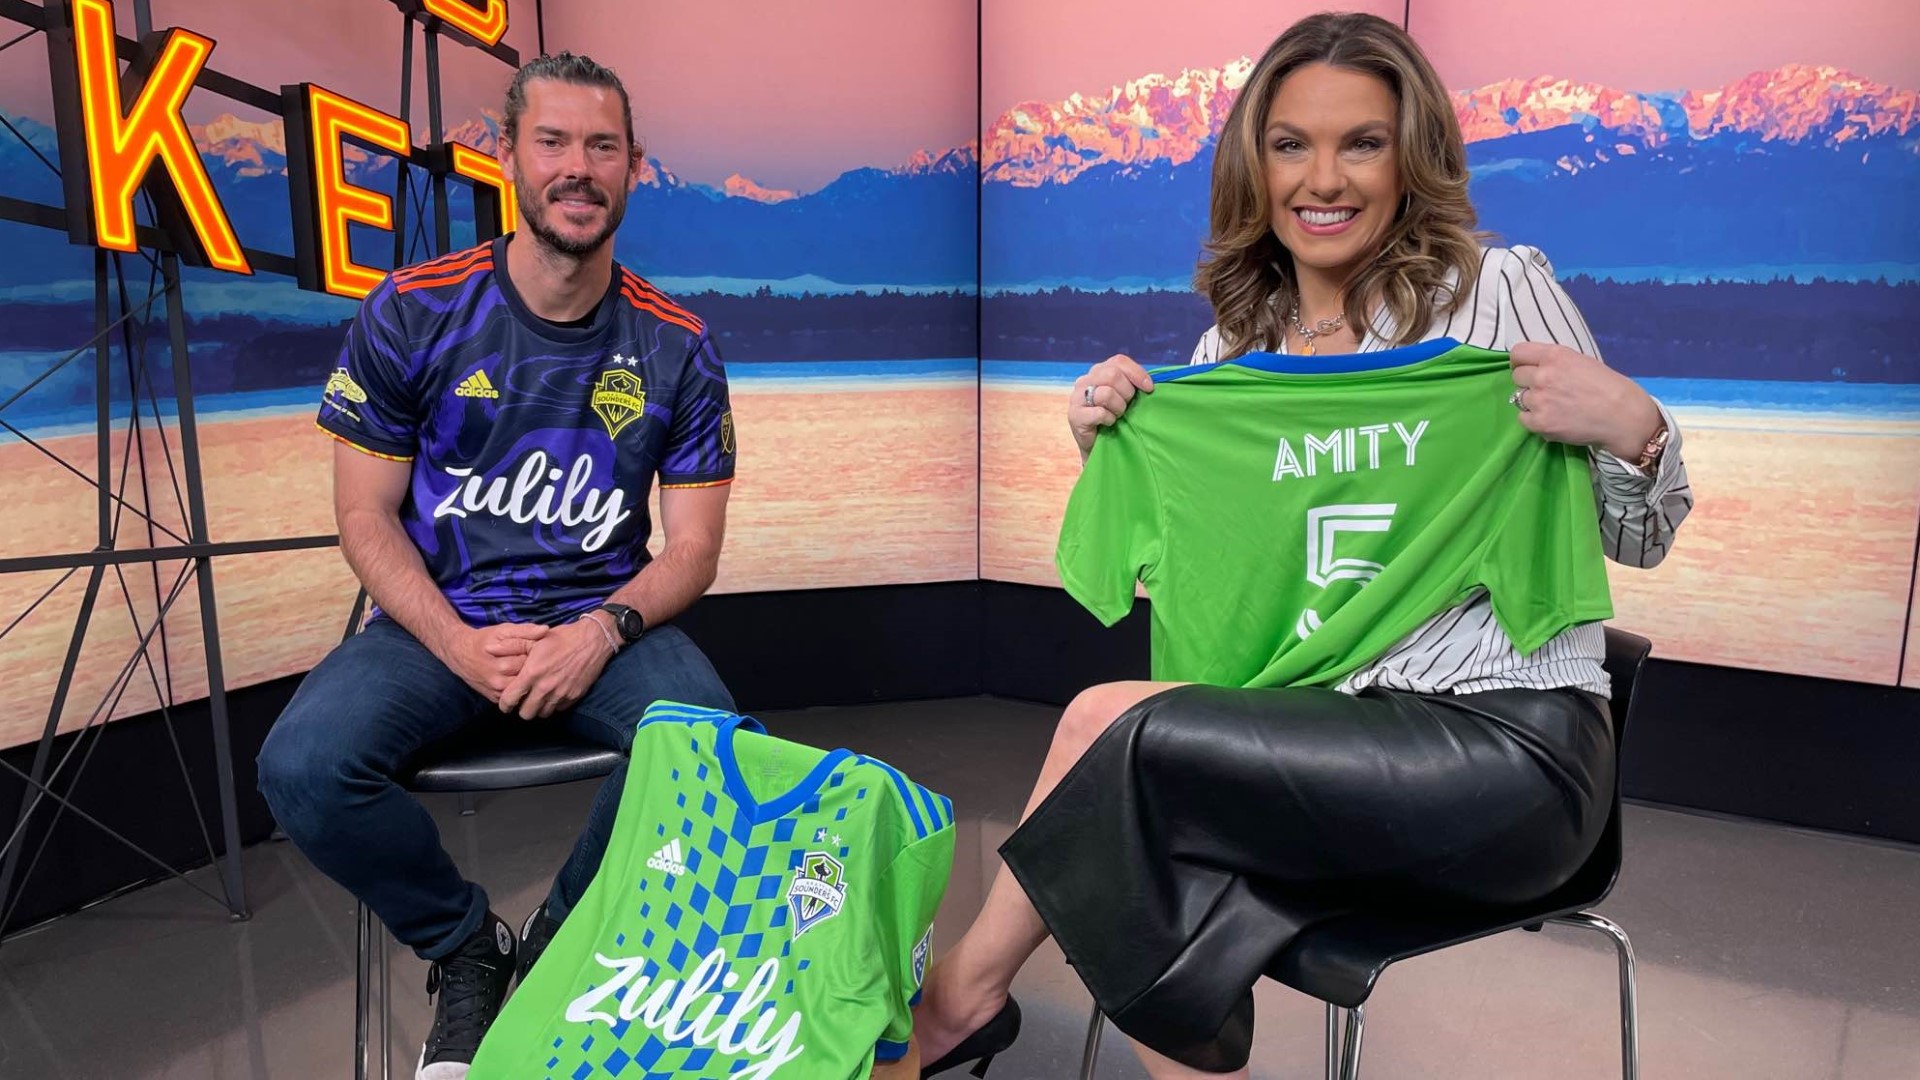 Former Seattle Sounder Brad Evans joined New Day NW to talk about the CONCACAF Champions League Final happening May 4. #newdaynw